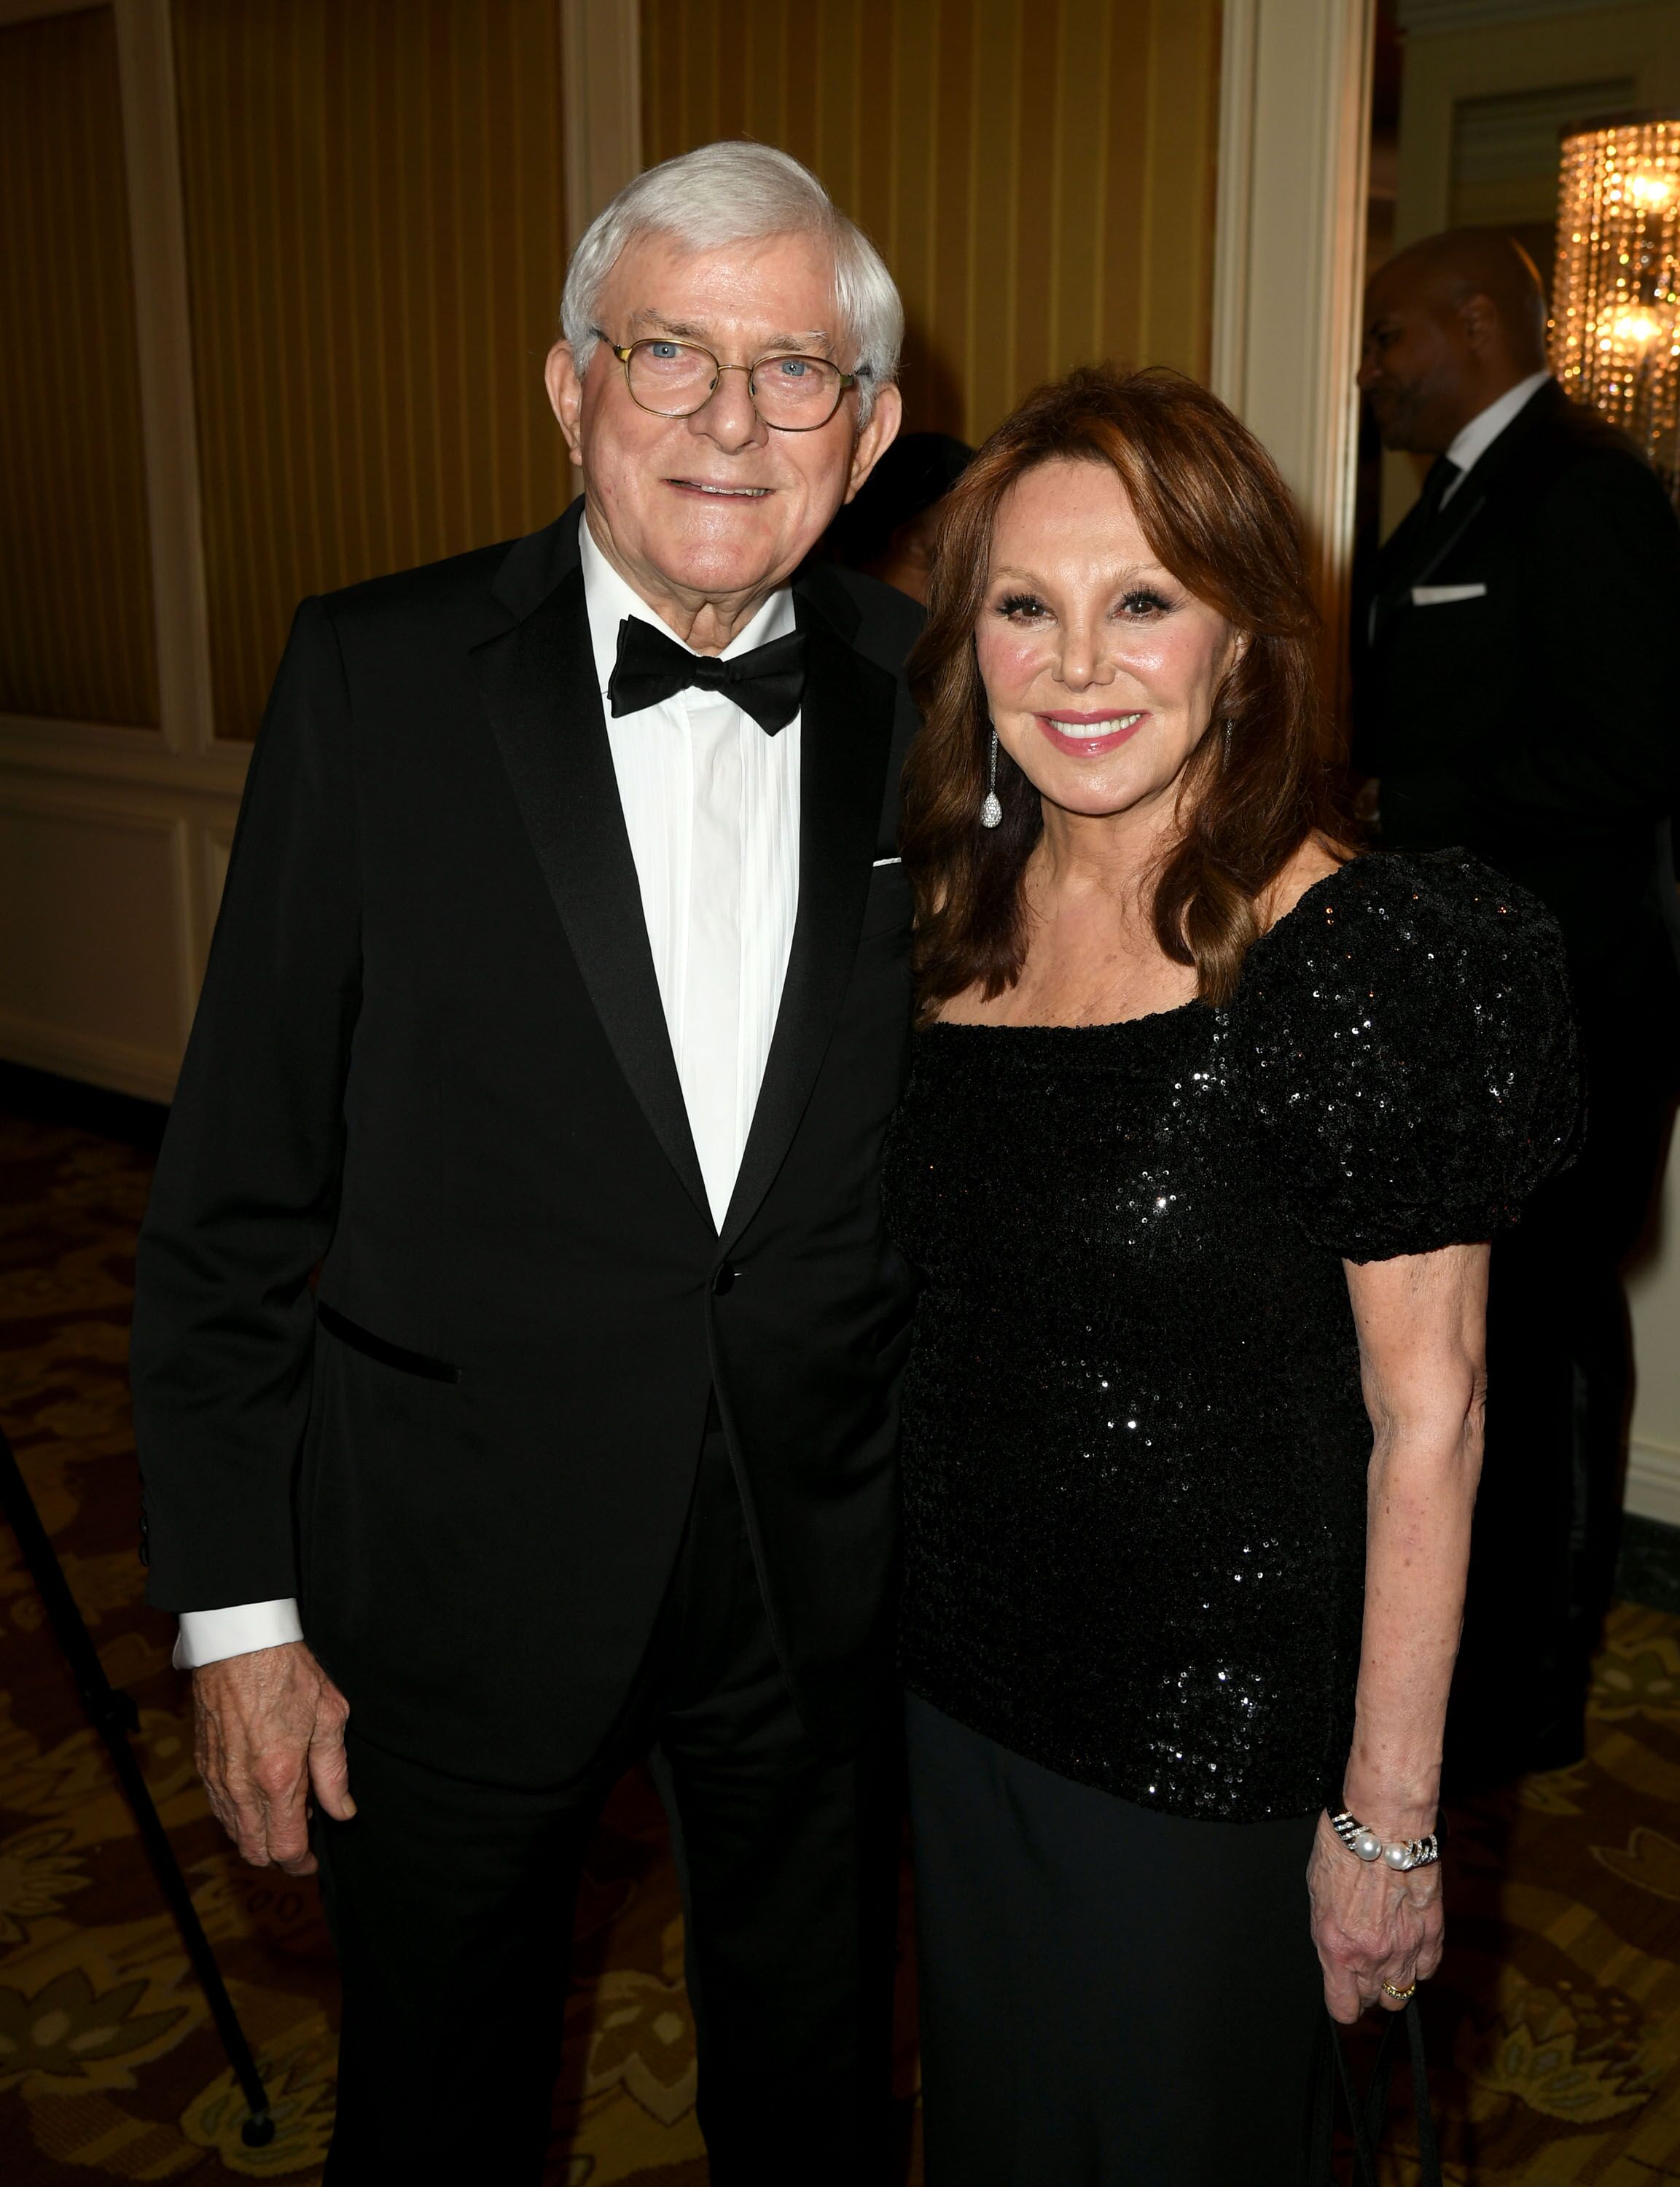 Phil Donahue and Marlo Thomas arrive at the American Icon Awards. | Source: Getty Images